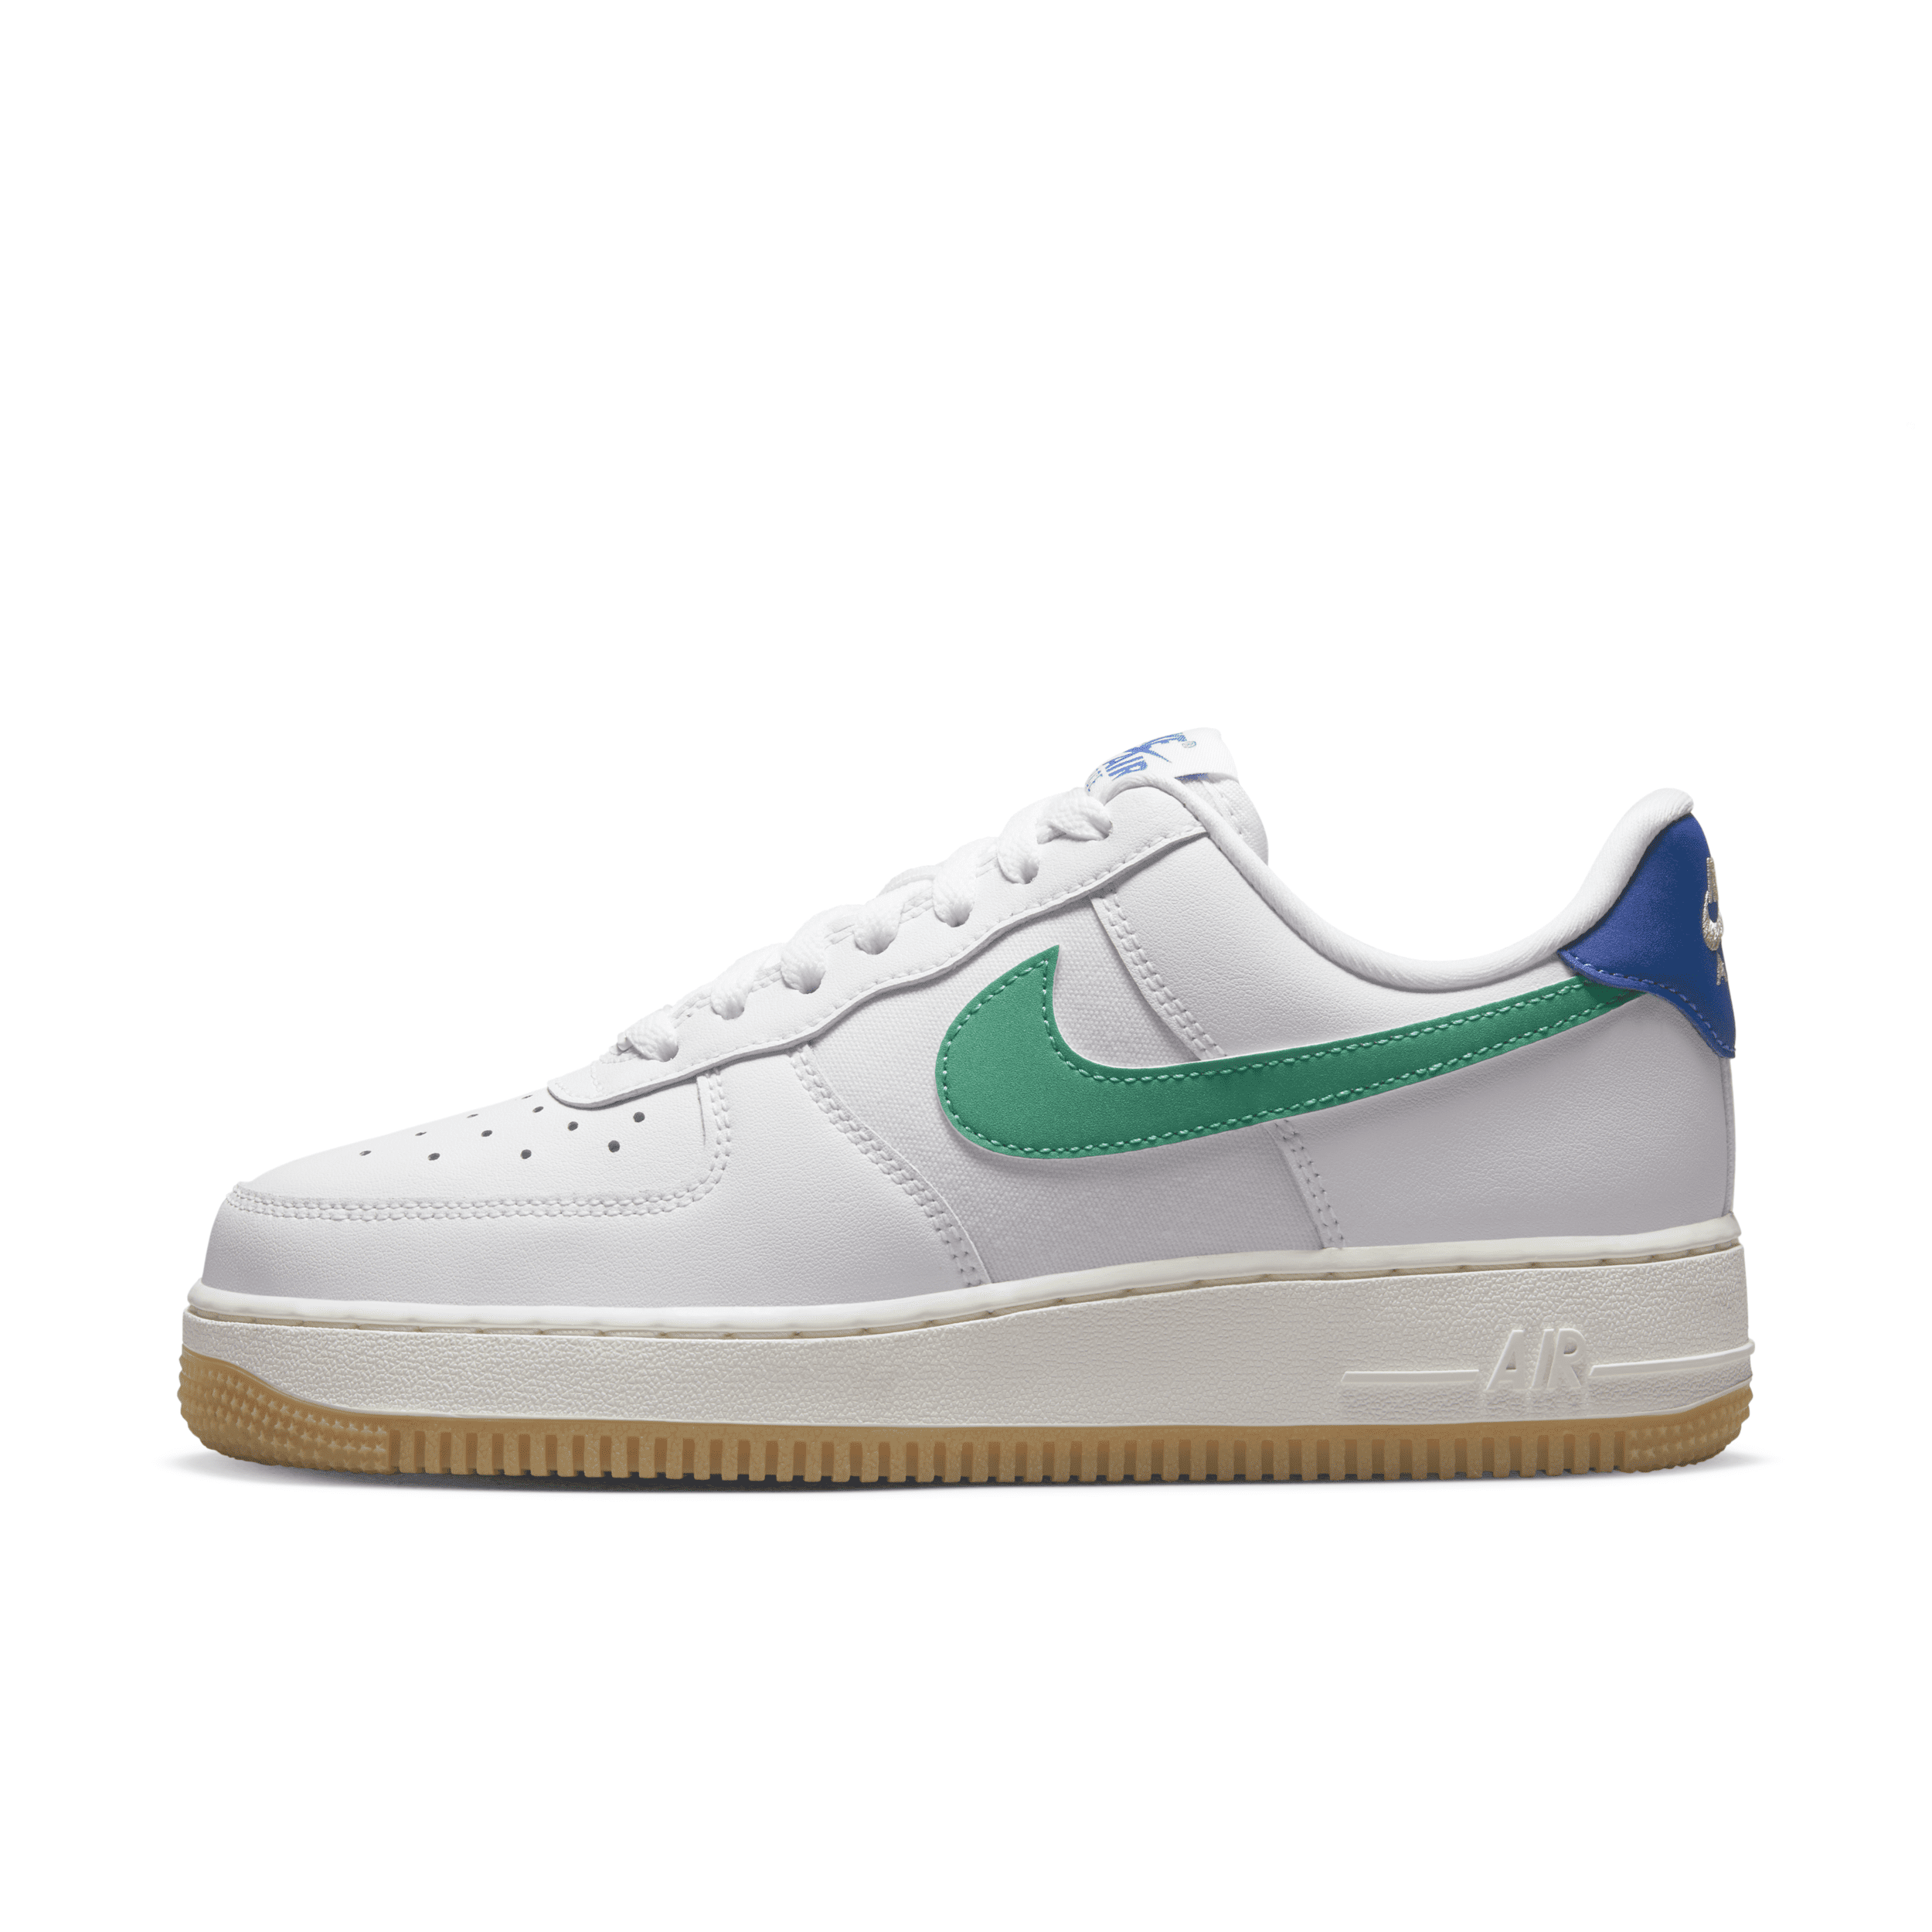 NIKE WOMEN'S AIR FORCE 1 '07 SHOES,1003839192